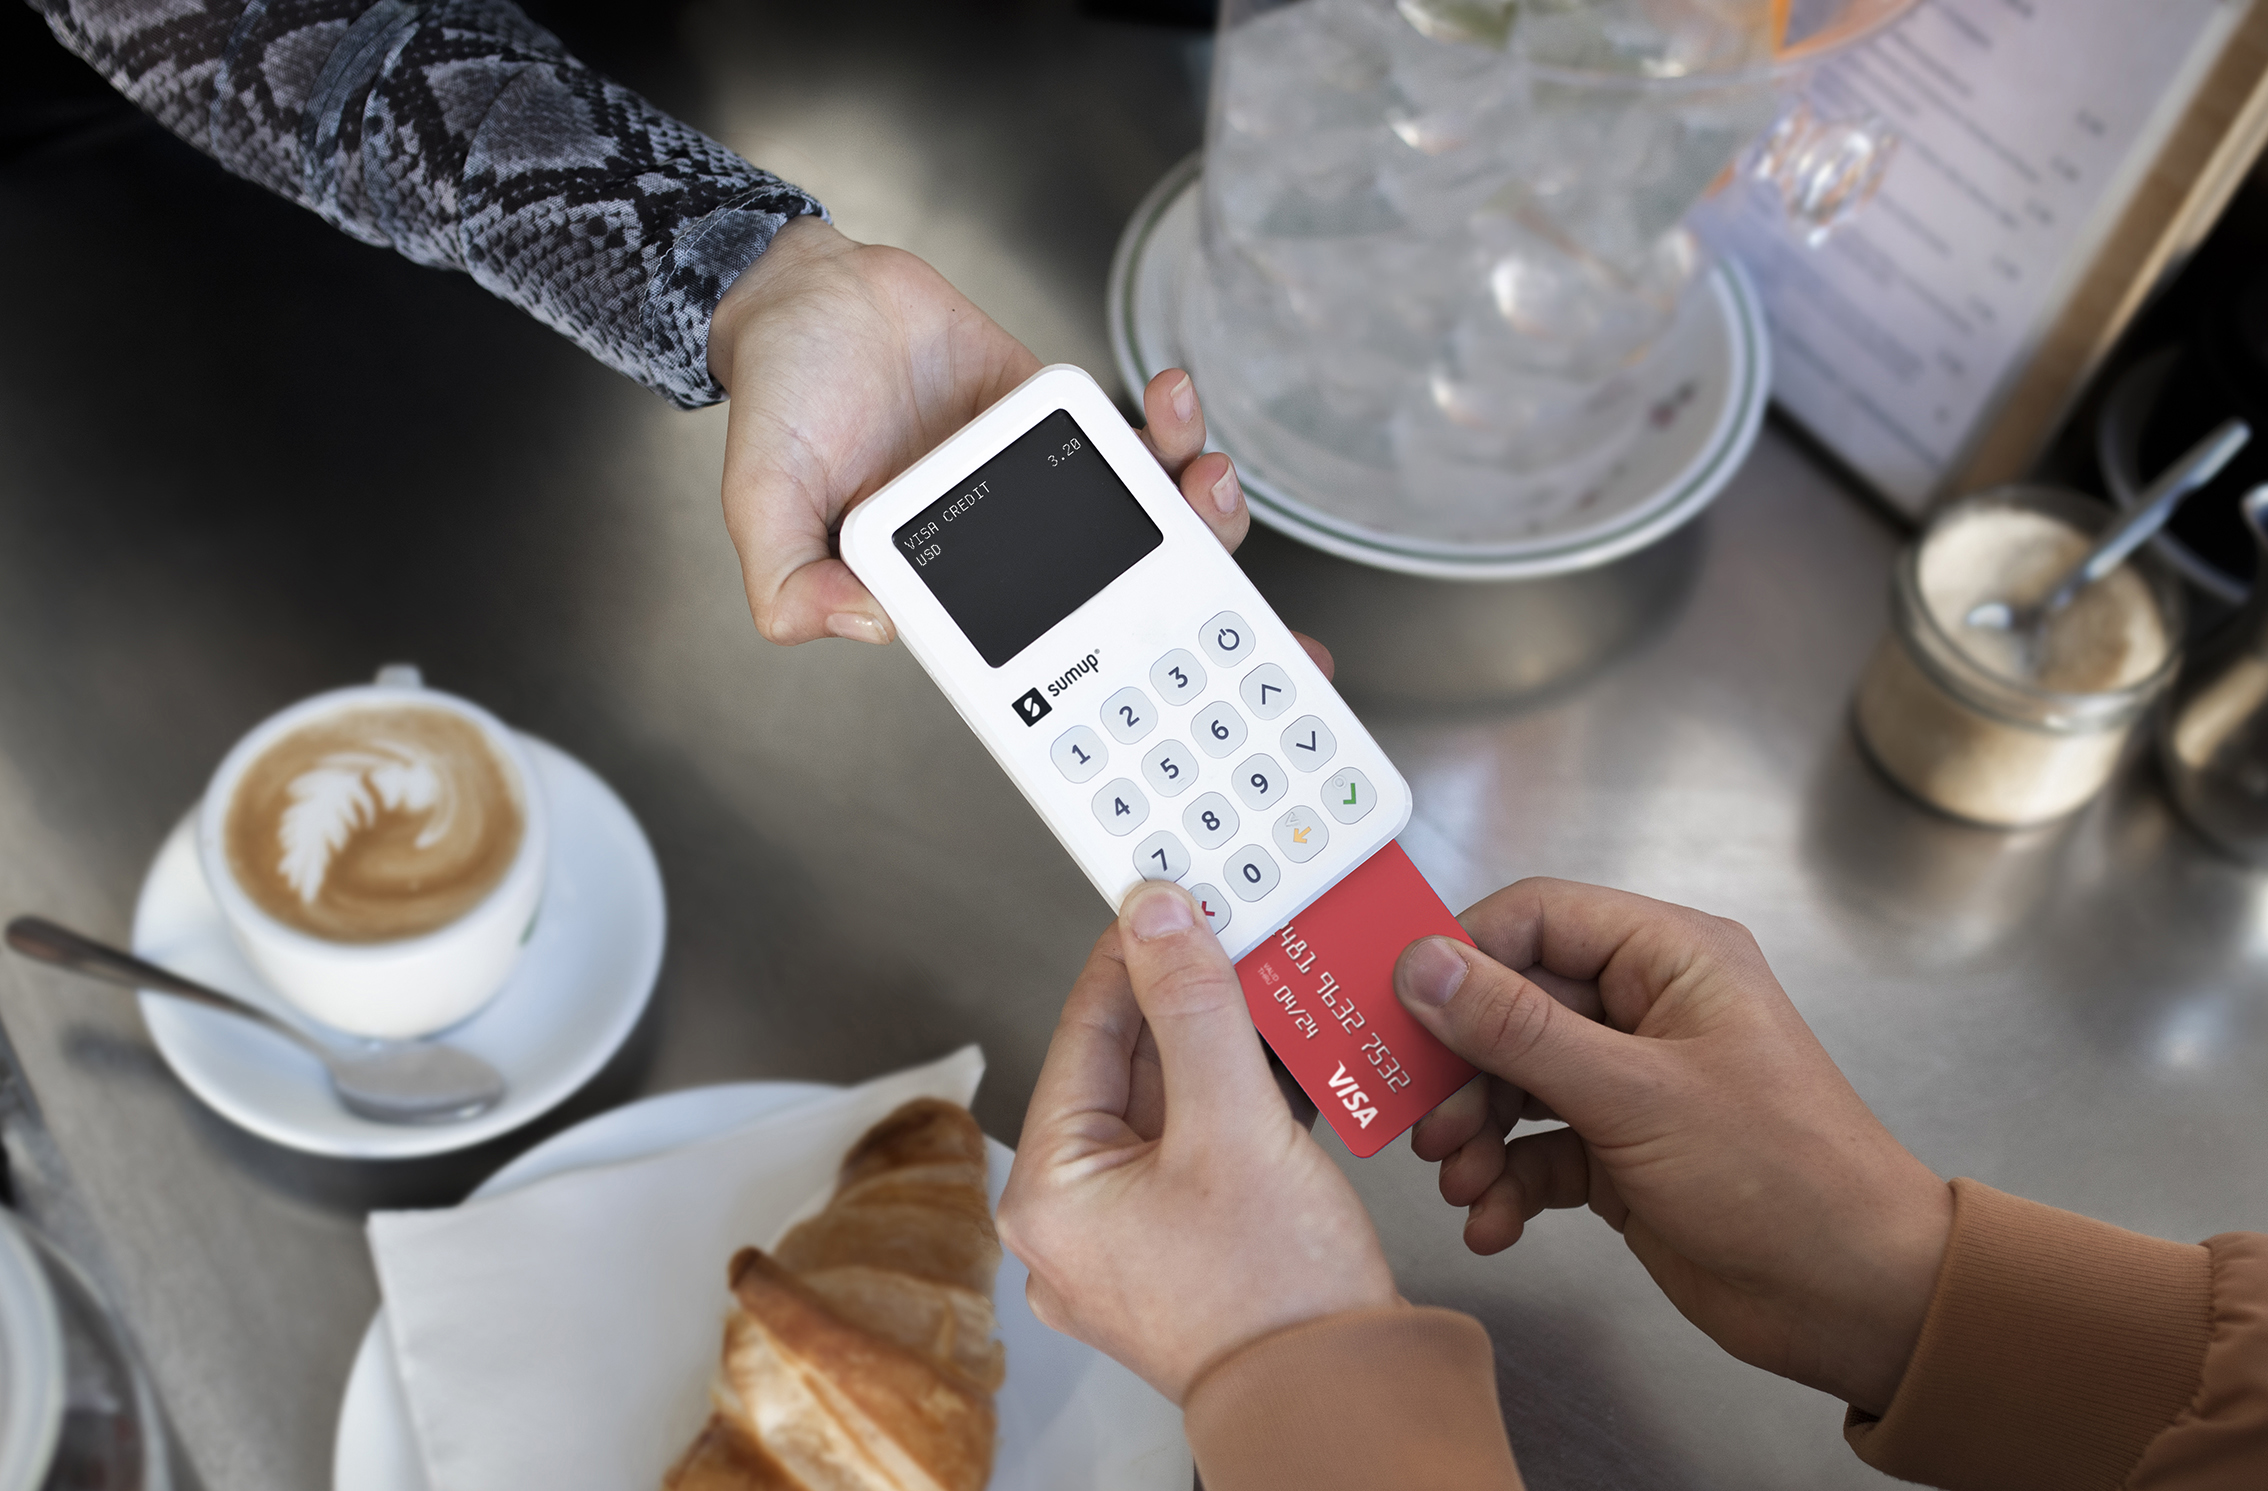 Discover the Sumup Eftpos terminals, for credit card payments